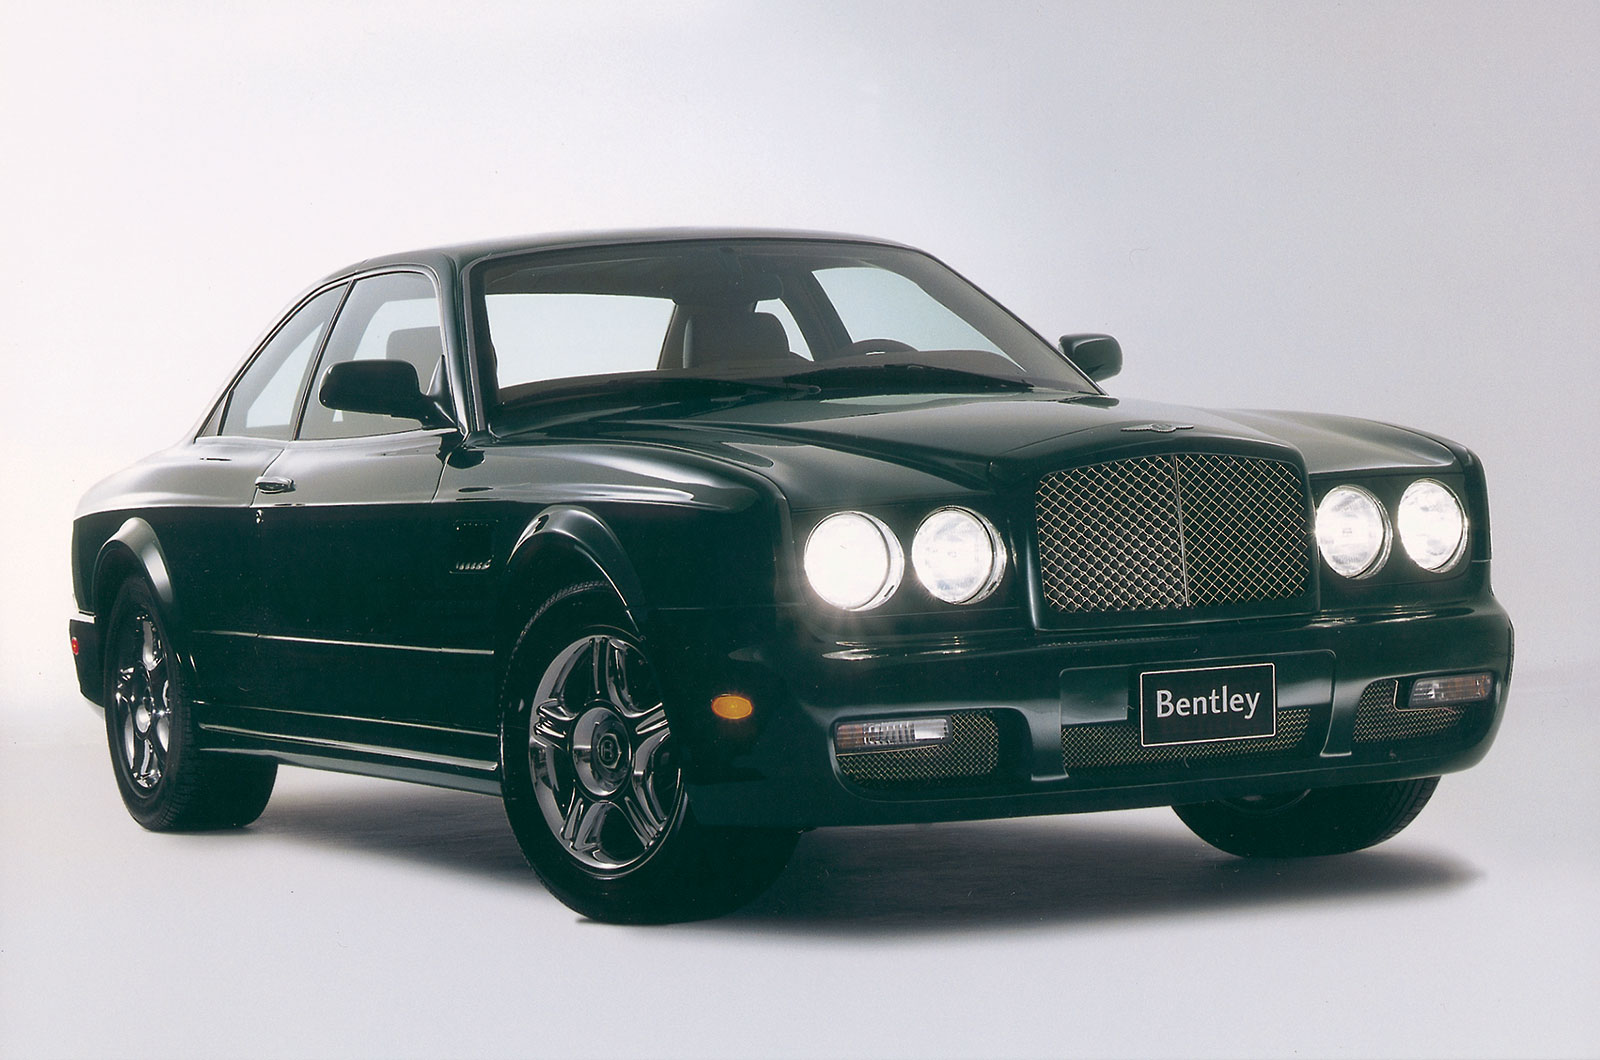 <p><span>The Continental R was fast and luxurious, but for those who wanted something that bit sportier Bentley came up with the Continental T. With its wheelbase shortened by four inches and the engine pepped up to produce <strong>405 HP </strong>and 590-lb ft of torque, the Continental T was quicker and more agile than the regular Continental R.</span></p>